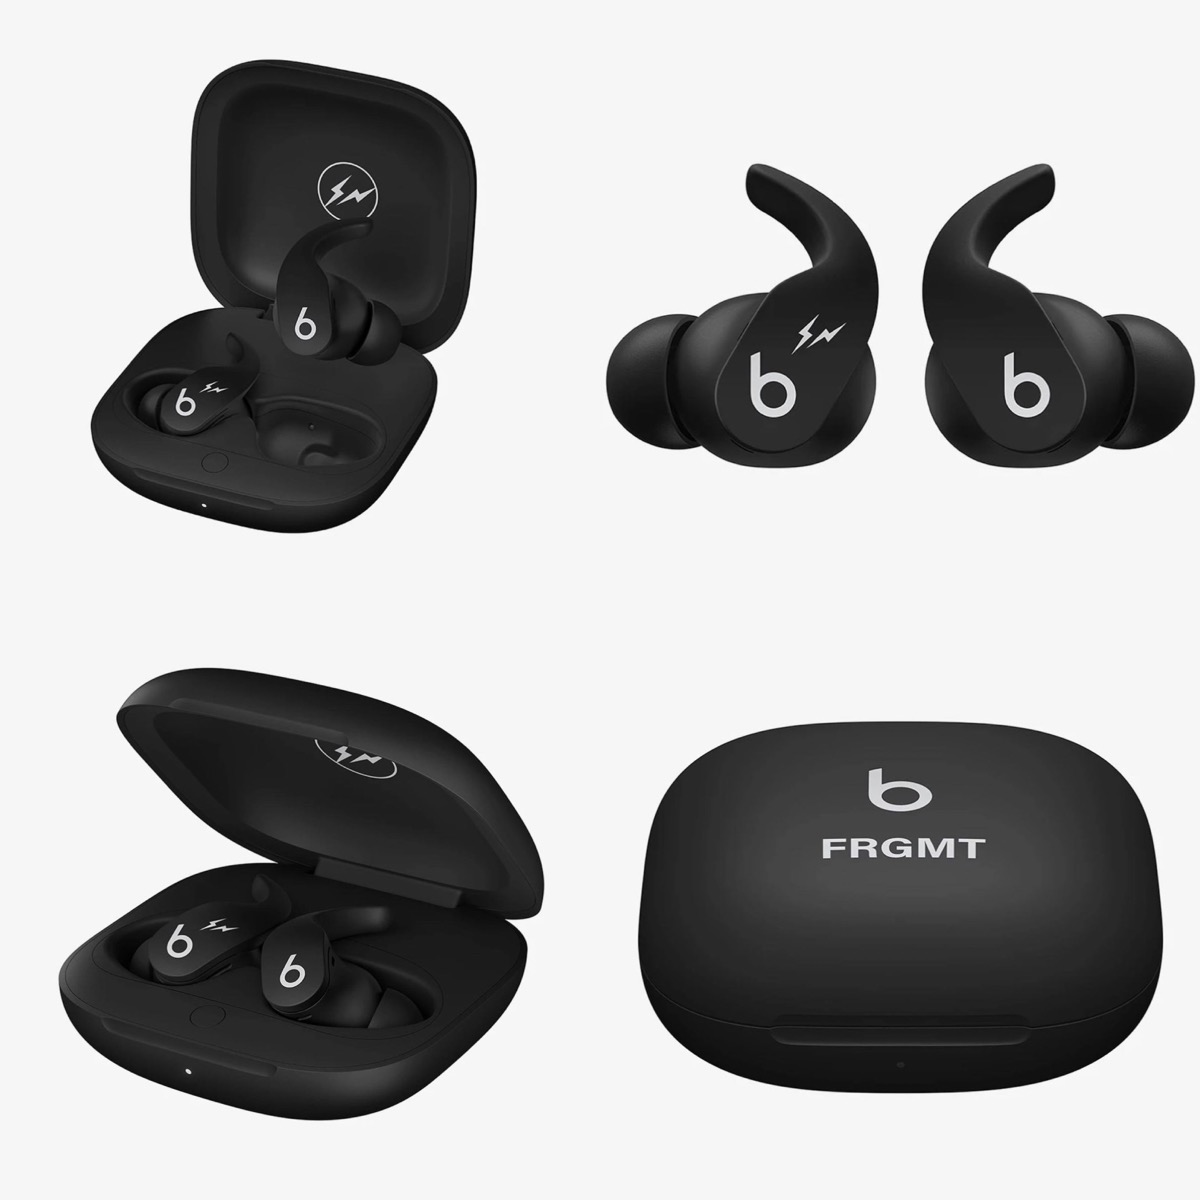 Beats Fit Pro by fragment designが国内7月7日に発売予定 【各取扱店